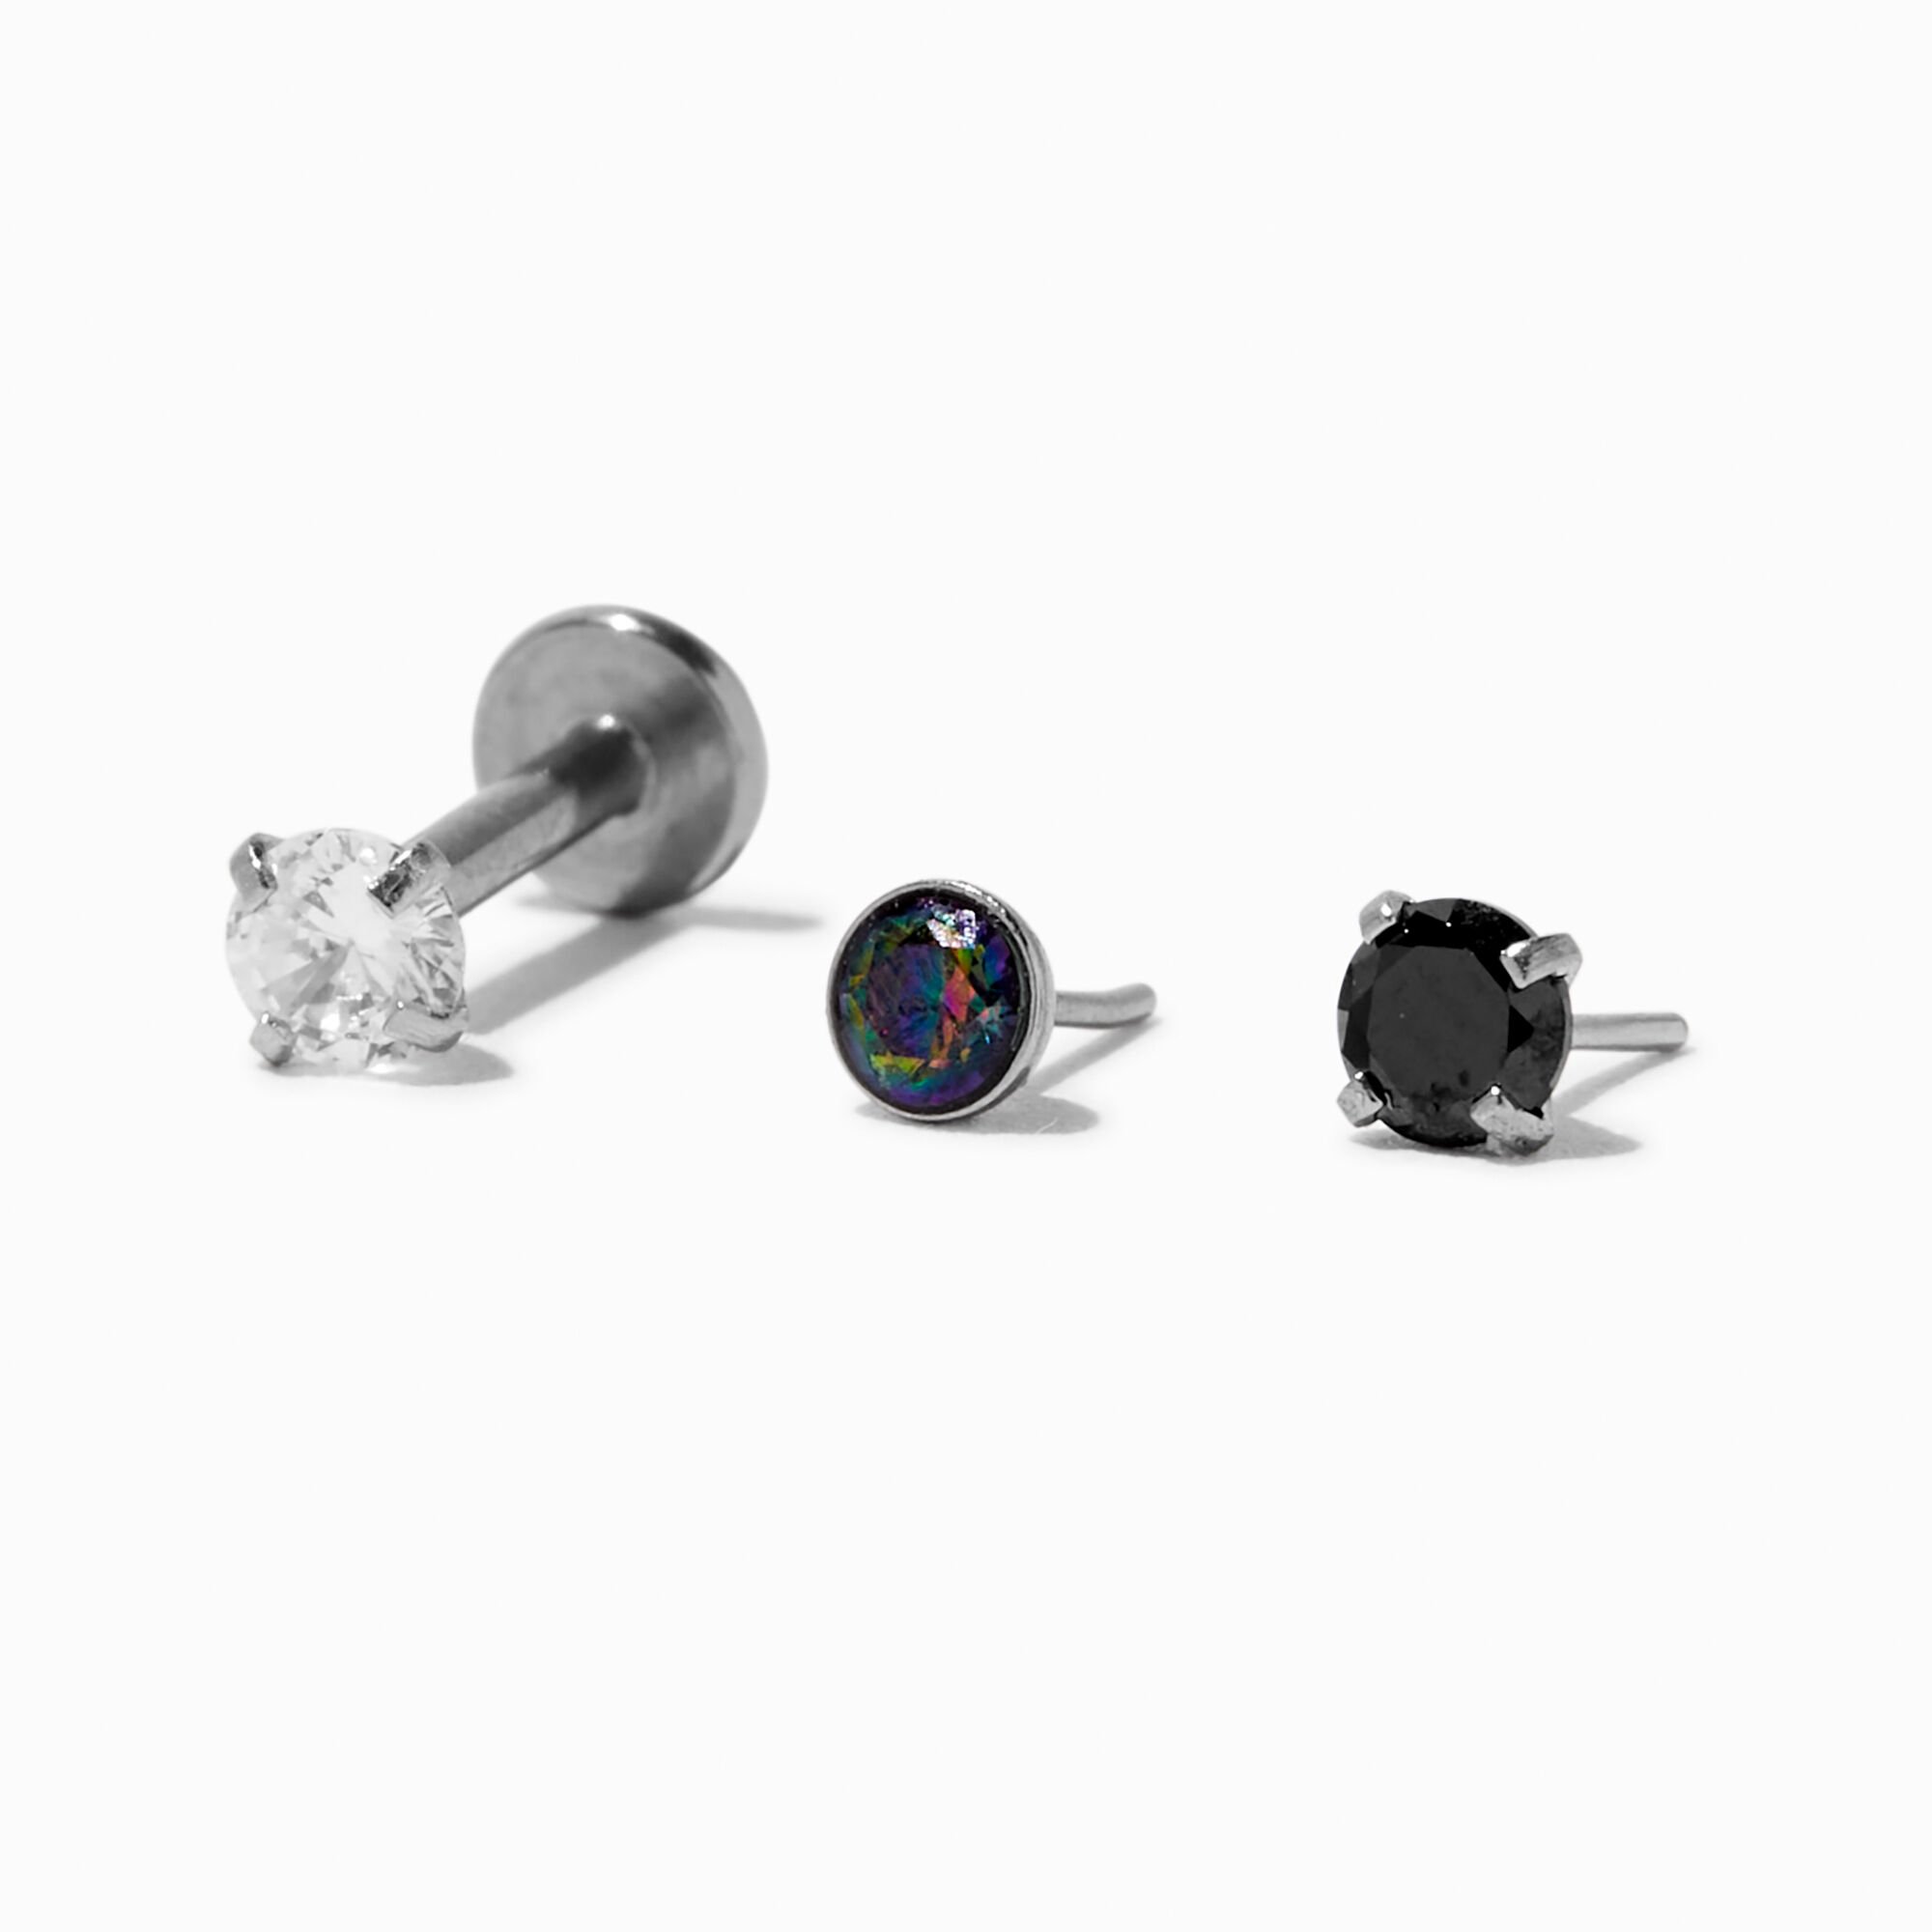 View Claires Stainless Steel Changeable Stud 16G Threadless Cartilage Earrings 3 Pack Black information